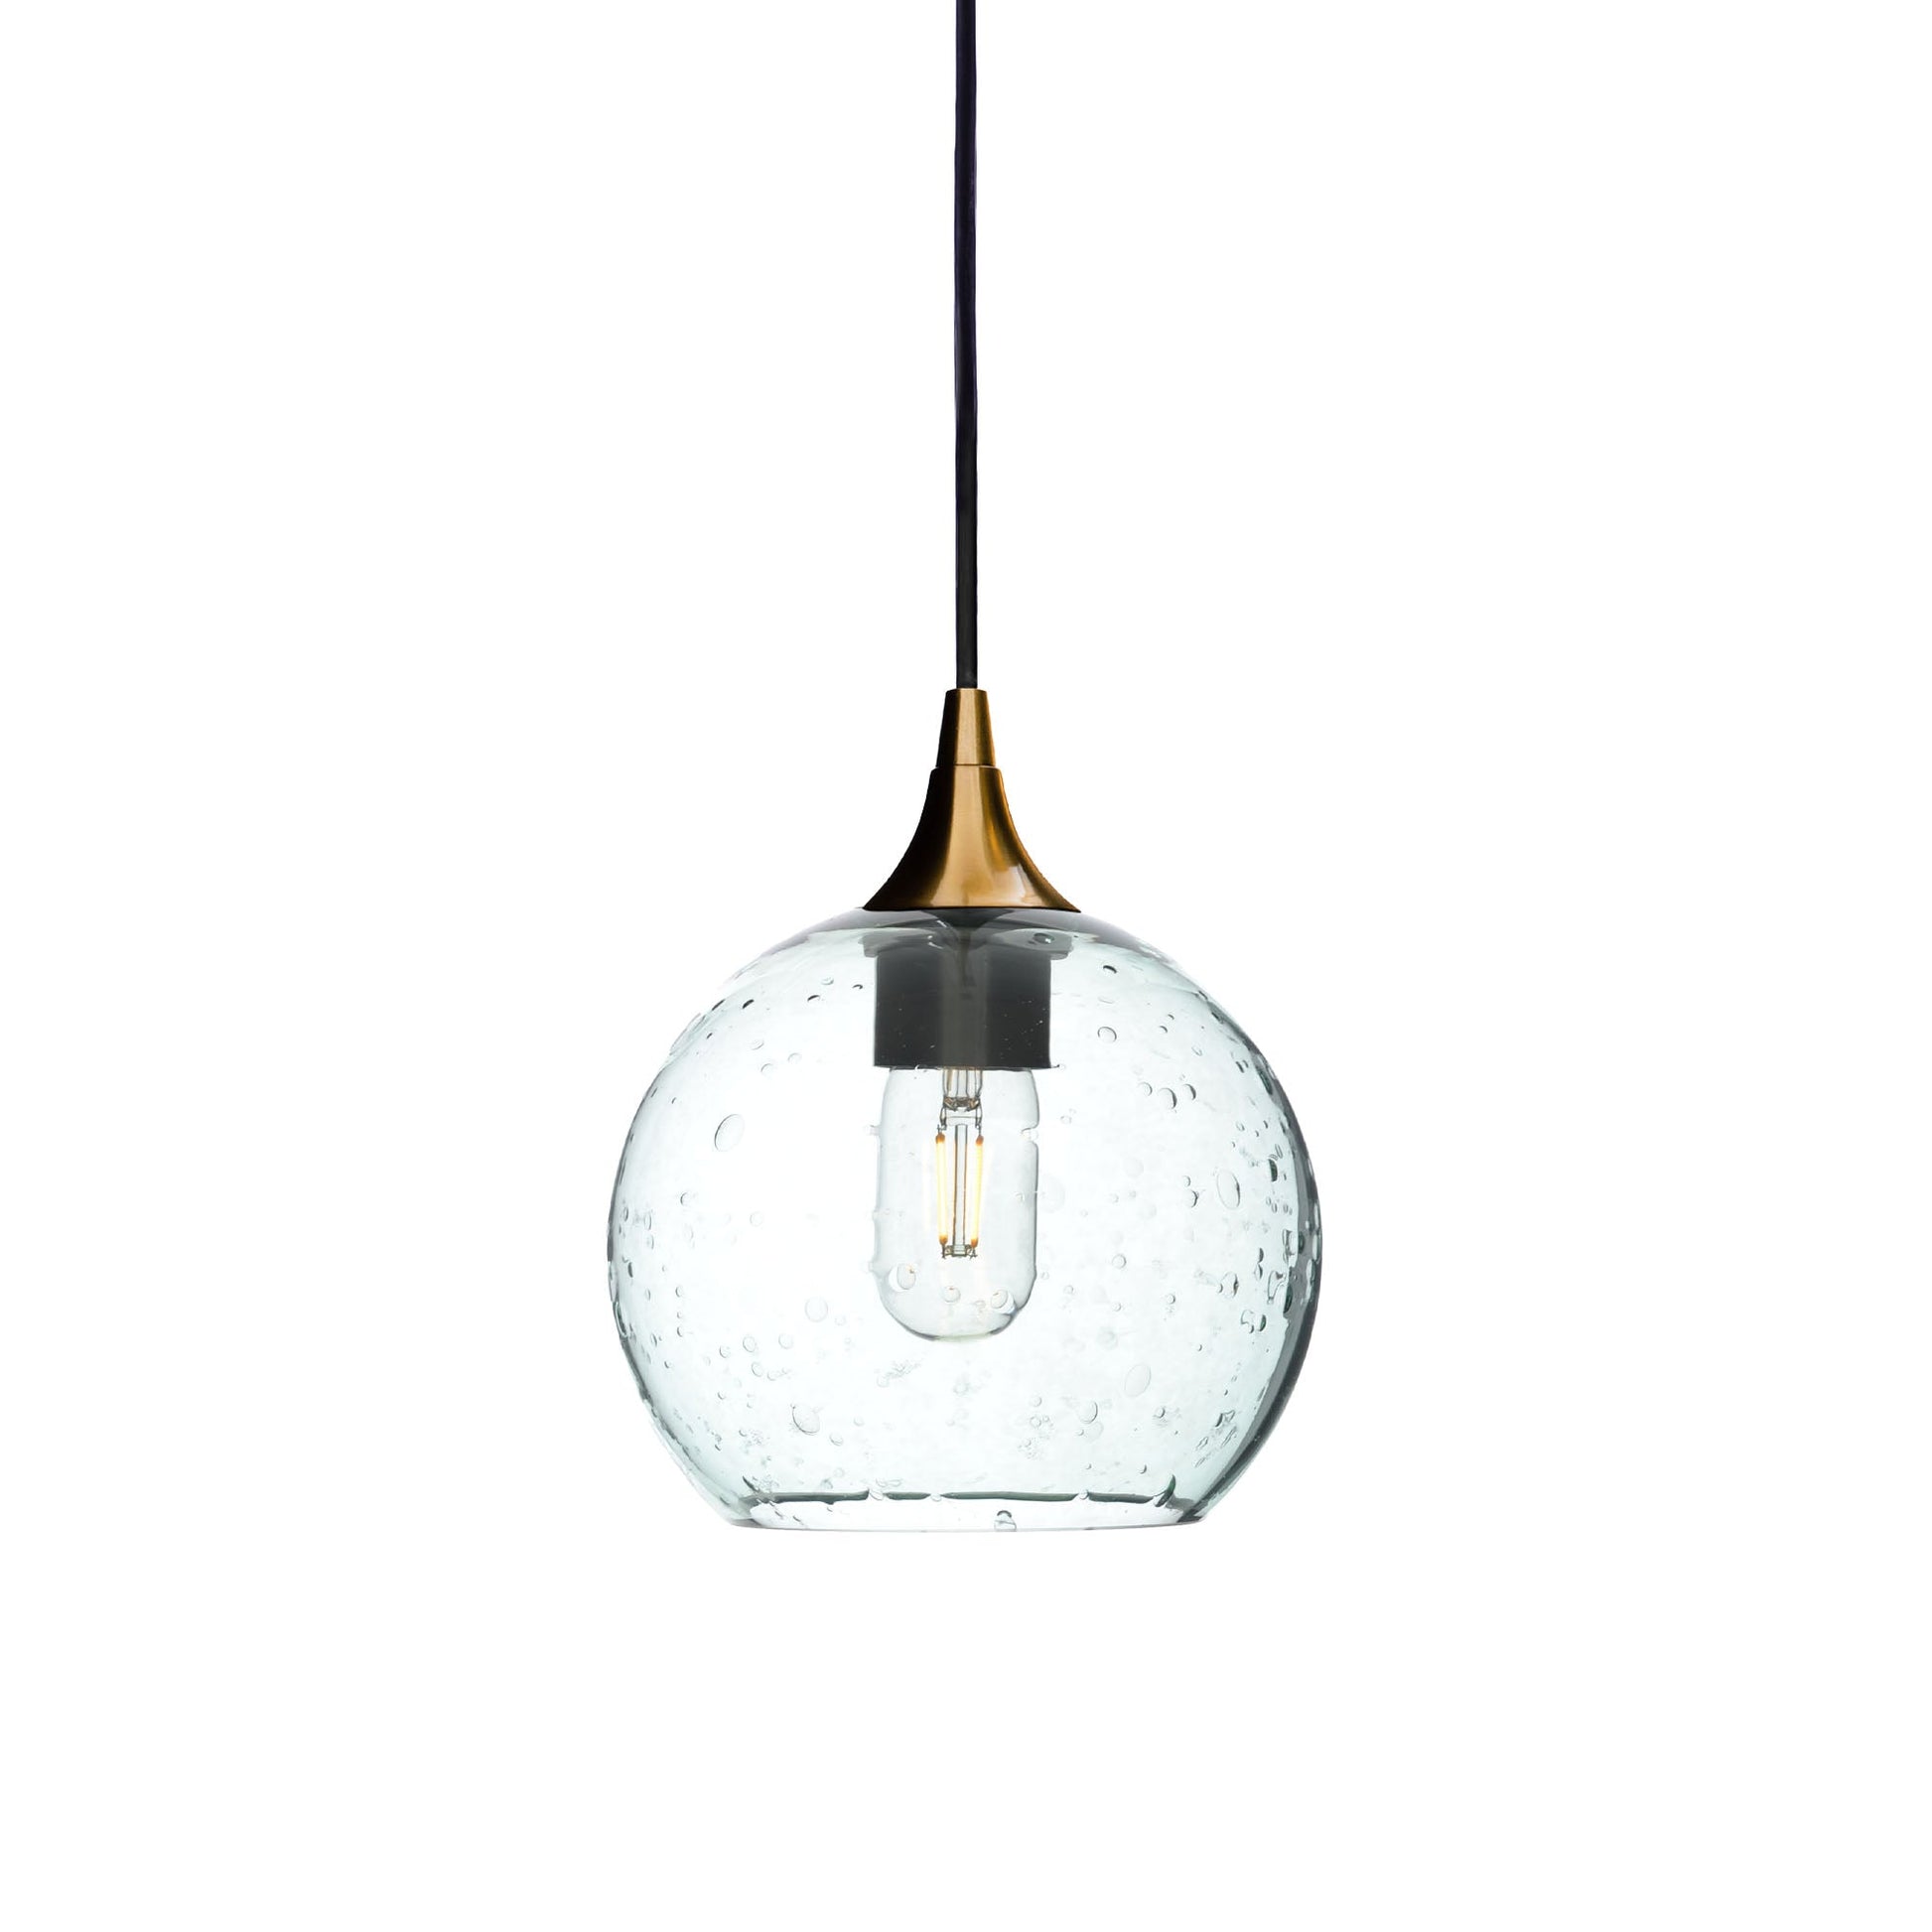 767 Lunar: Single Pendant Light-Pendant Lighting-Bicycle Glass Co - Hotshop-Eco Clear-Polished Brass-Bicycle Glass Co